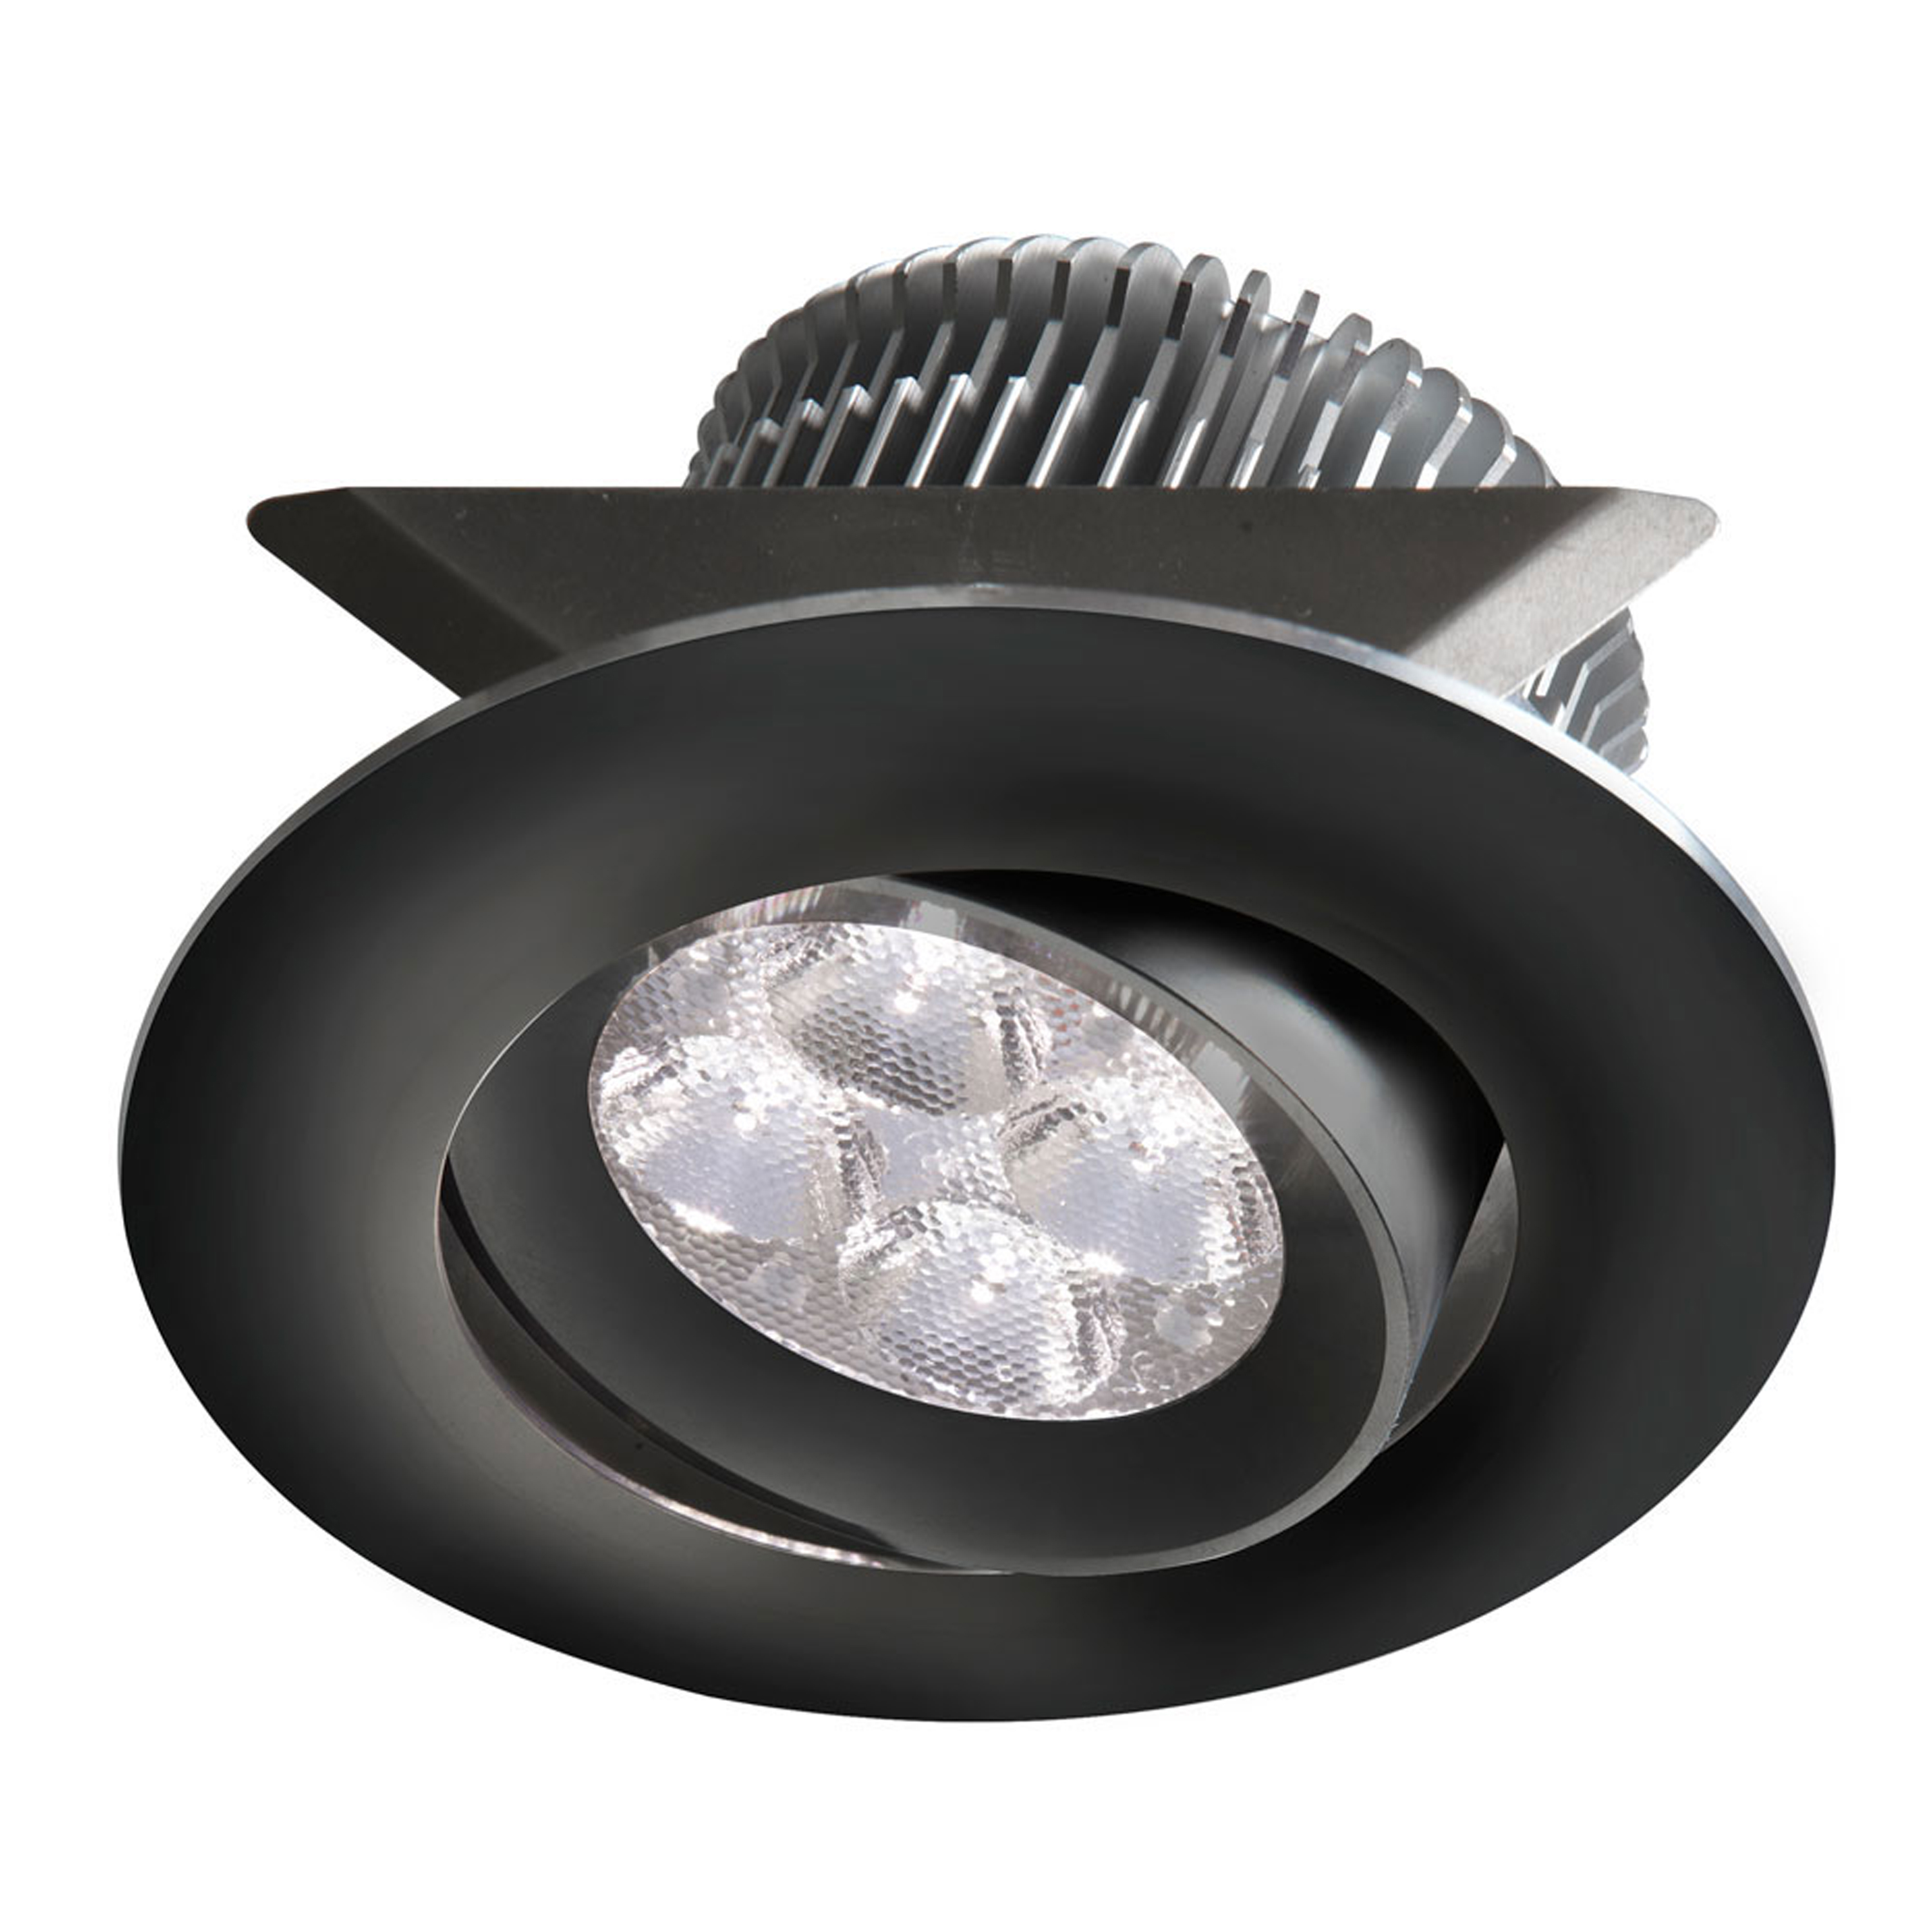 Black 2x4W 3000K, CRI80+, 25° beam, 24VDC input with Male Connector, 18" Lead wire, D84xH50 mm, Dimmable.±25° Adjustable tilt angle.